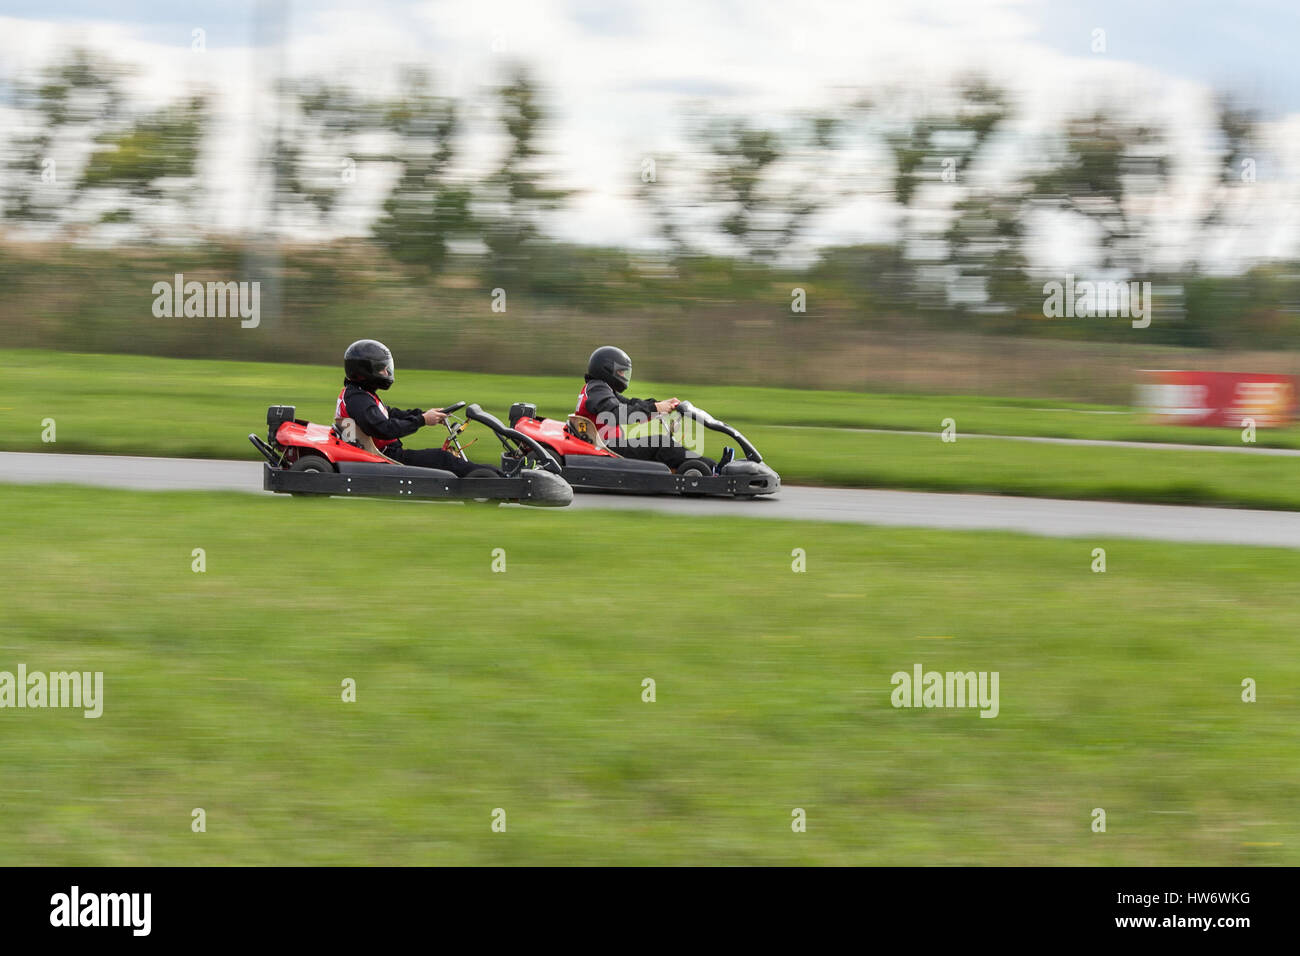 The racer on carting. Stock Photo